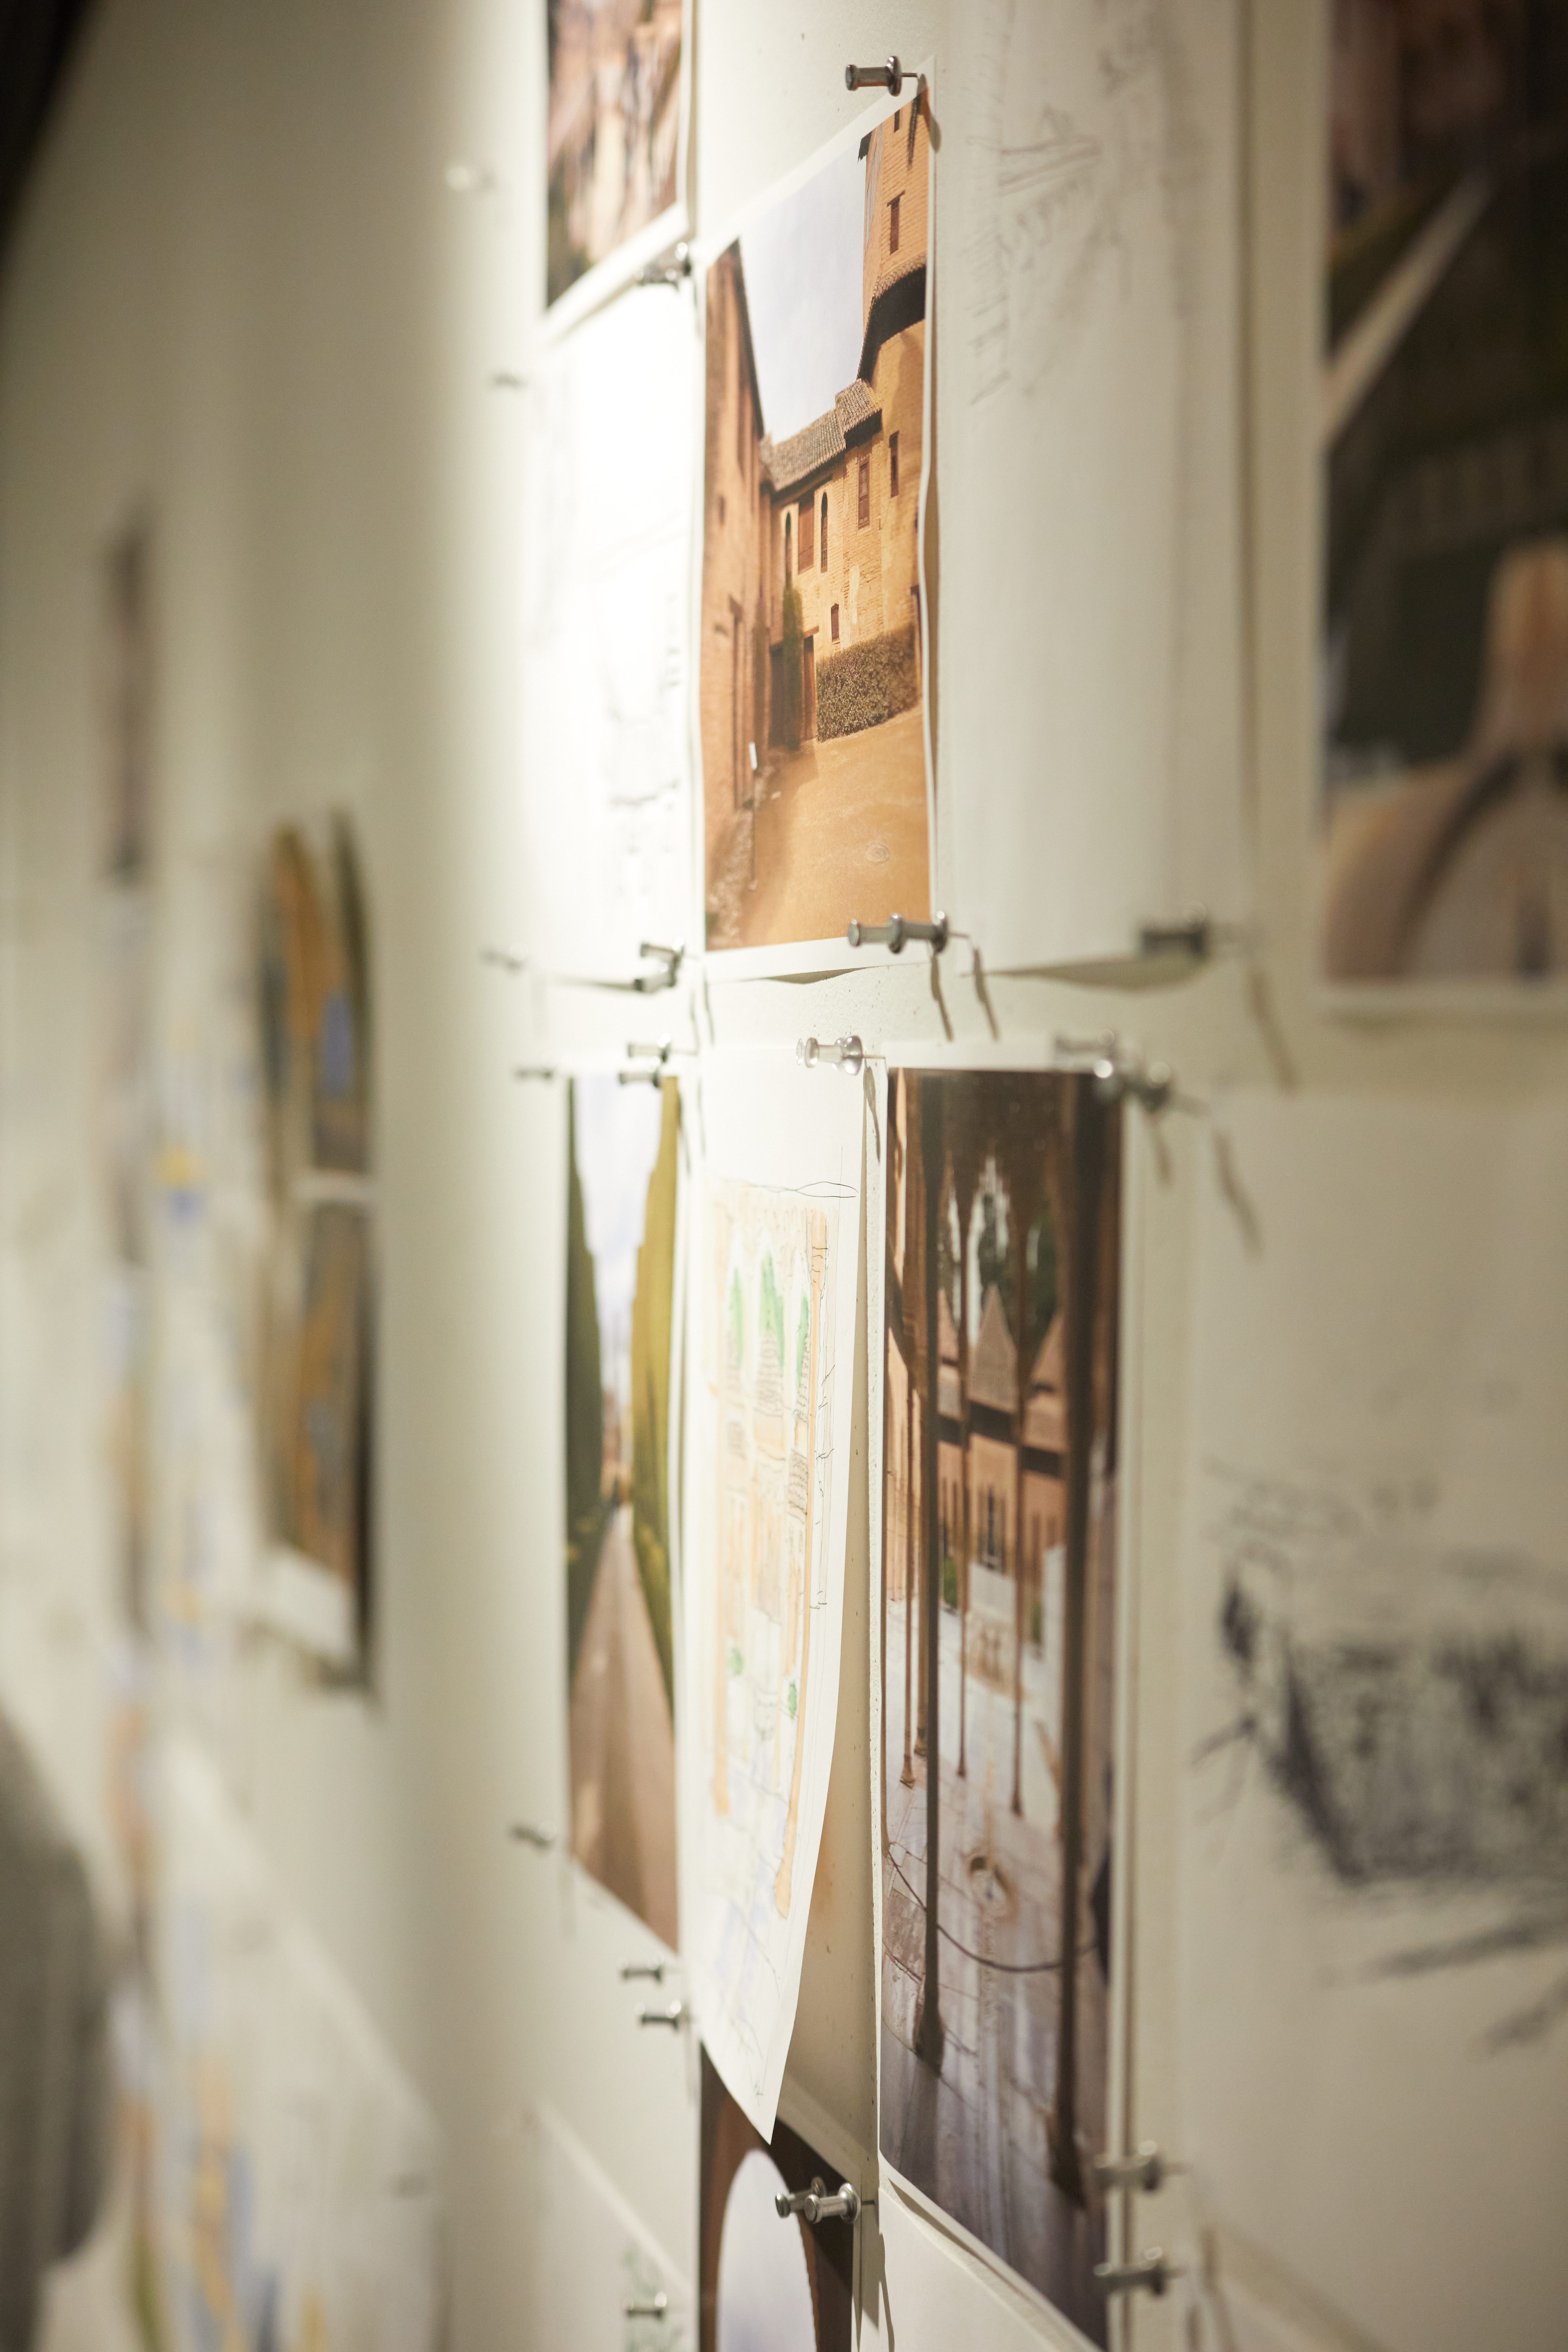 sketches posted on the wall